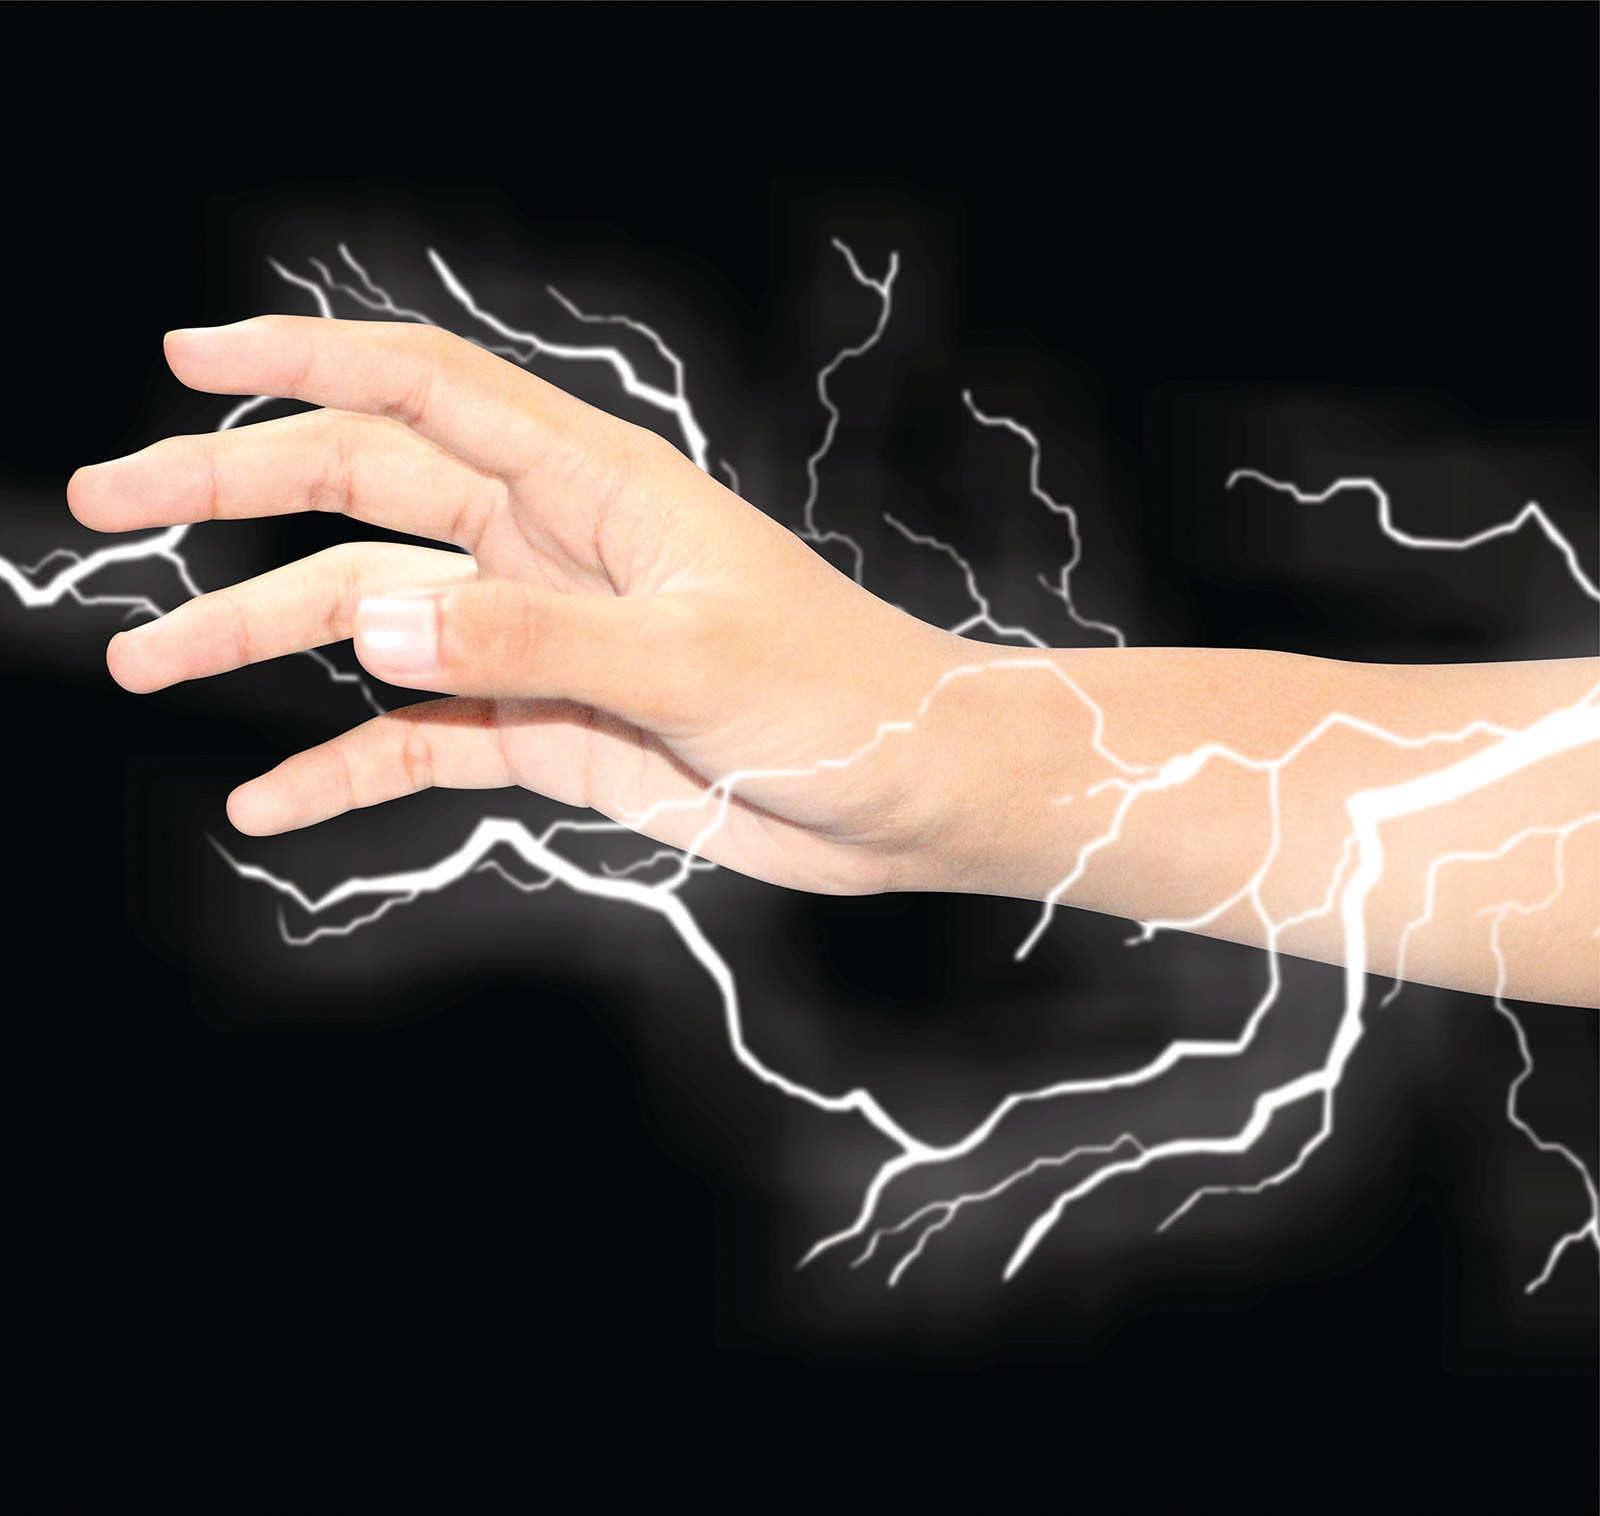 Outstretched arm surrounded by electrical currents